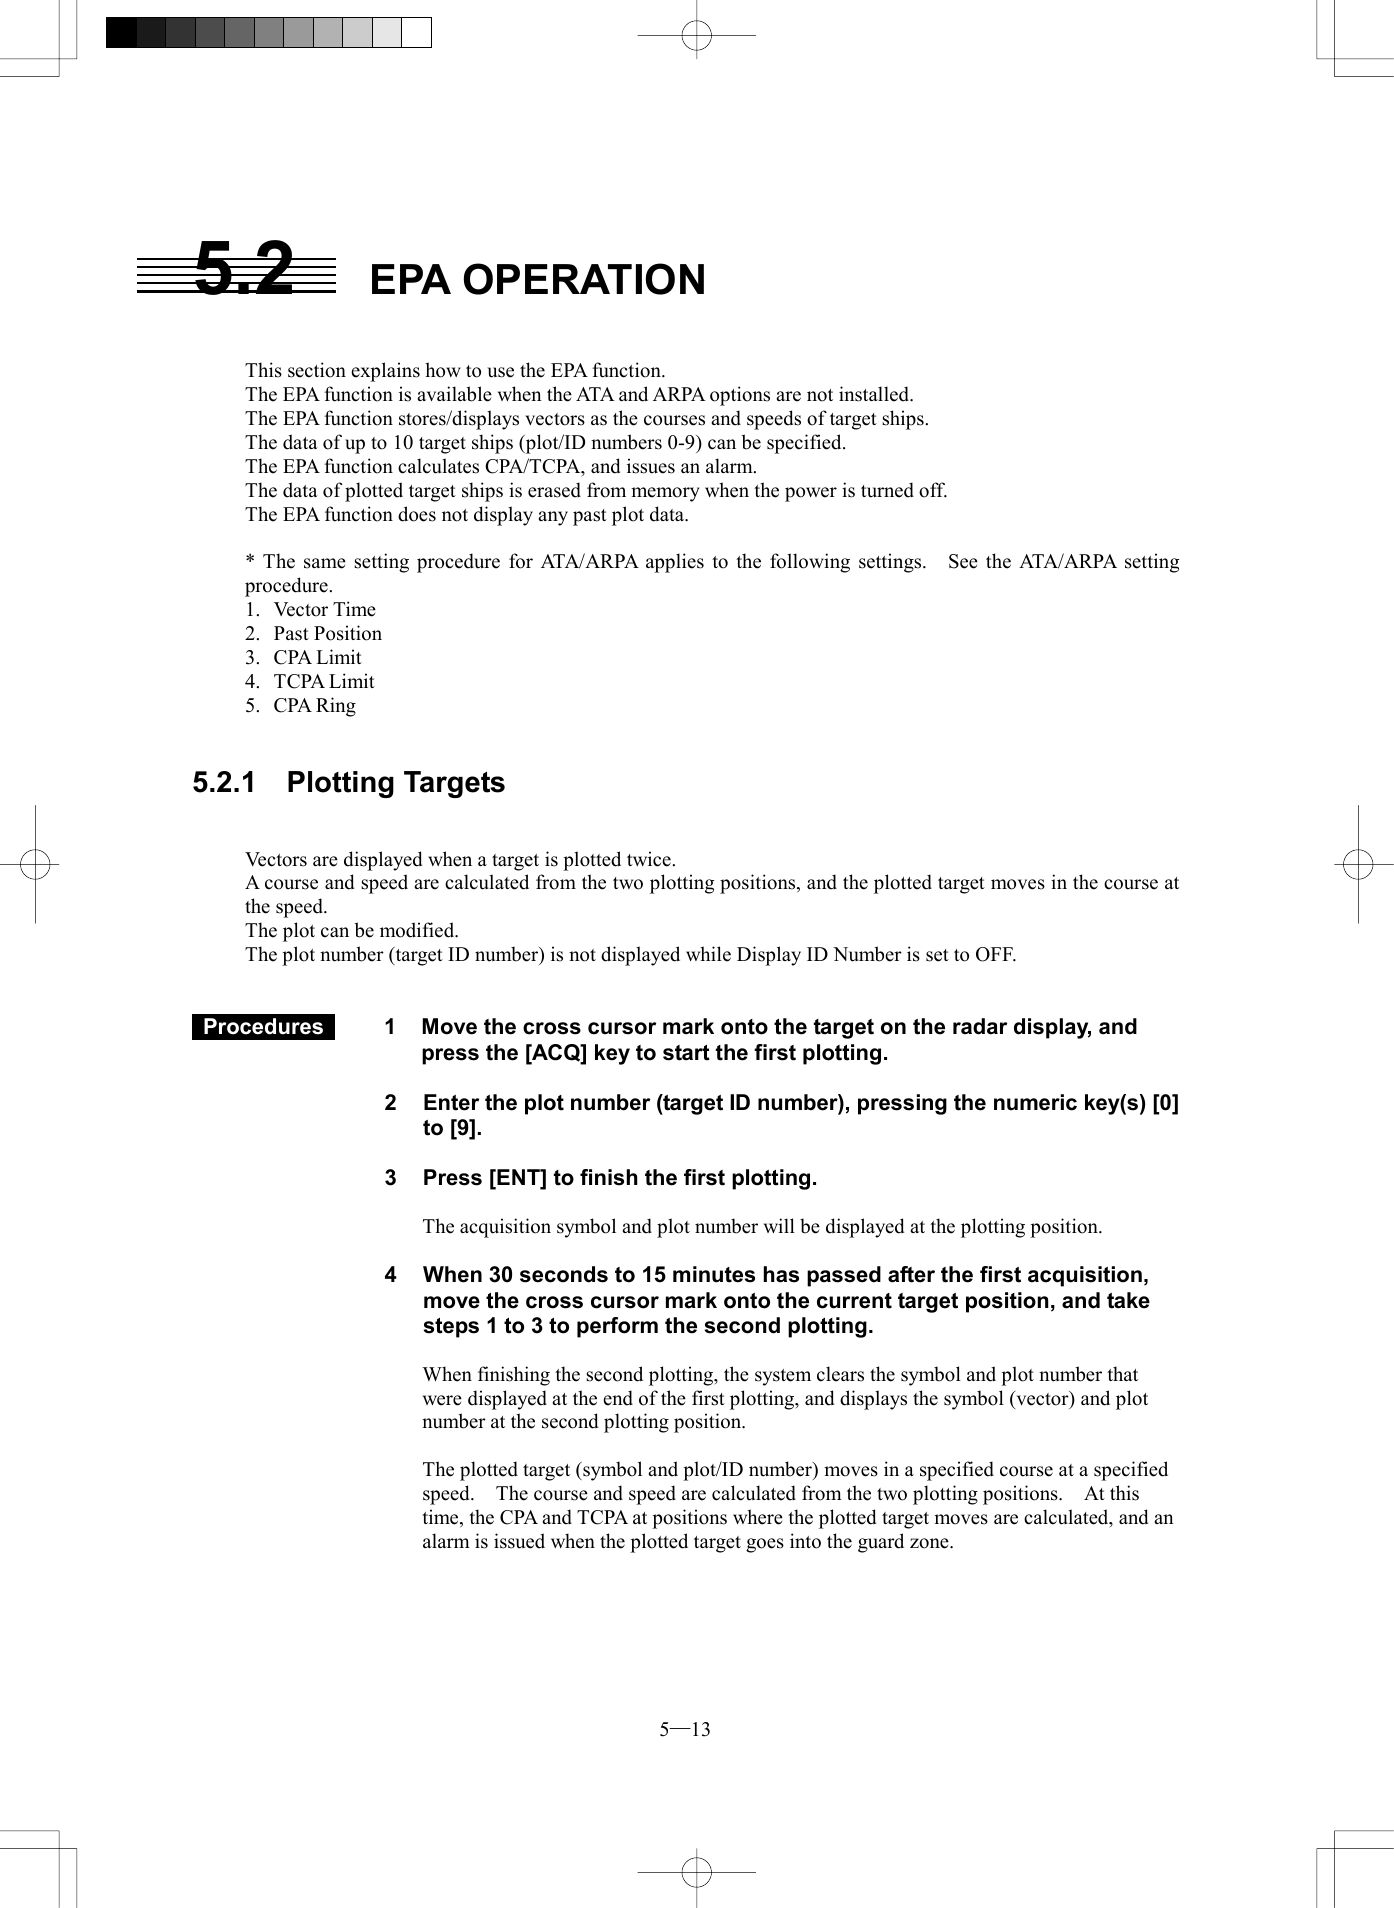  5─13 5.2 EPA OPERATION   This section explains how to use the EPA function. The EPA function is available when the ATA and ARPA options are not installed. The EPA function stores/displays vectors as the courses and speeds of target ships. The data of up to 10 target ships (plot/ID numbers 0-9) can be specified. The EPA function calculates CPA/TCPA, and issues an alarm. The data of plotted target ships is erased from memory when the power is turned off. The EPA function does not display any past plot data.  * The same setting procedure for ATA/ARPA applies to the following settings.  See the ATA/ARPA setting procedure. 1. Vector Time 2. Past Position 3. CPA Limit 4. TCPA Limit 5. CPA Ring   5.2.1  Plotting Targets   Vectors are displayed when a target is plotted twice. A course and speed are calculated from the two plotting positions, and the plotted target moves in the course at the speed. The plot can be modified. The plot number (target ID number) is not displayed while Display ID Number is set to OFF.    Procedures   1  Move the cross cursor mark onto the target on the radar display, and press the [ACQ] key to start the first plotting.  2  Enter the plot number (target ID number), pressing the numeric key(s) [0] to [9].  3    Press [ENT] to finish the first plotting.  The acquisition symbol and plot number will be displayed at the plotting position.  4  When 30 seconds to 15 minutes has passed after the first acquisition, move the cross cursor mark onto the current target position, and take steps 1 to 3 to perform the second plotting.  When finishing the second plotting, the system clears the symbol and plot number that were displayed at the end of the first plotting, and displays the symbol (vector) and plot number at the second plotting position.  The plotted target (symbol and plot/ID number) moves in a specified course at a specified speed.    The course and speed are calculated from the two plotting positions.    At this time, the CPA and TCPA at positions where the plotted target moves are calculated, and an alarm is issued when the plotted target goes into the guard zone.  